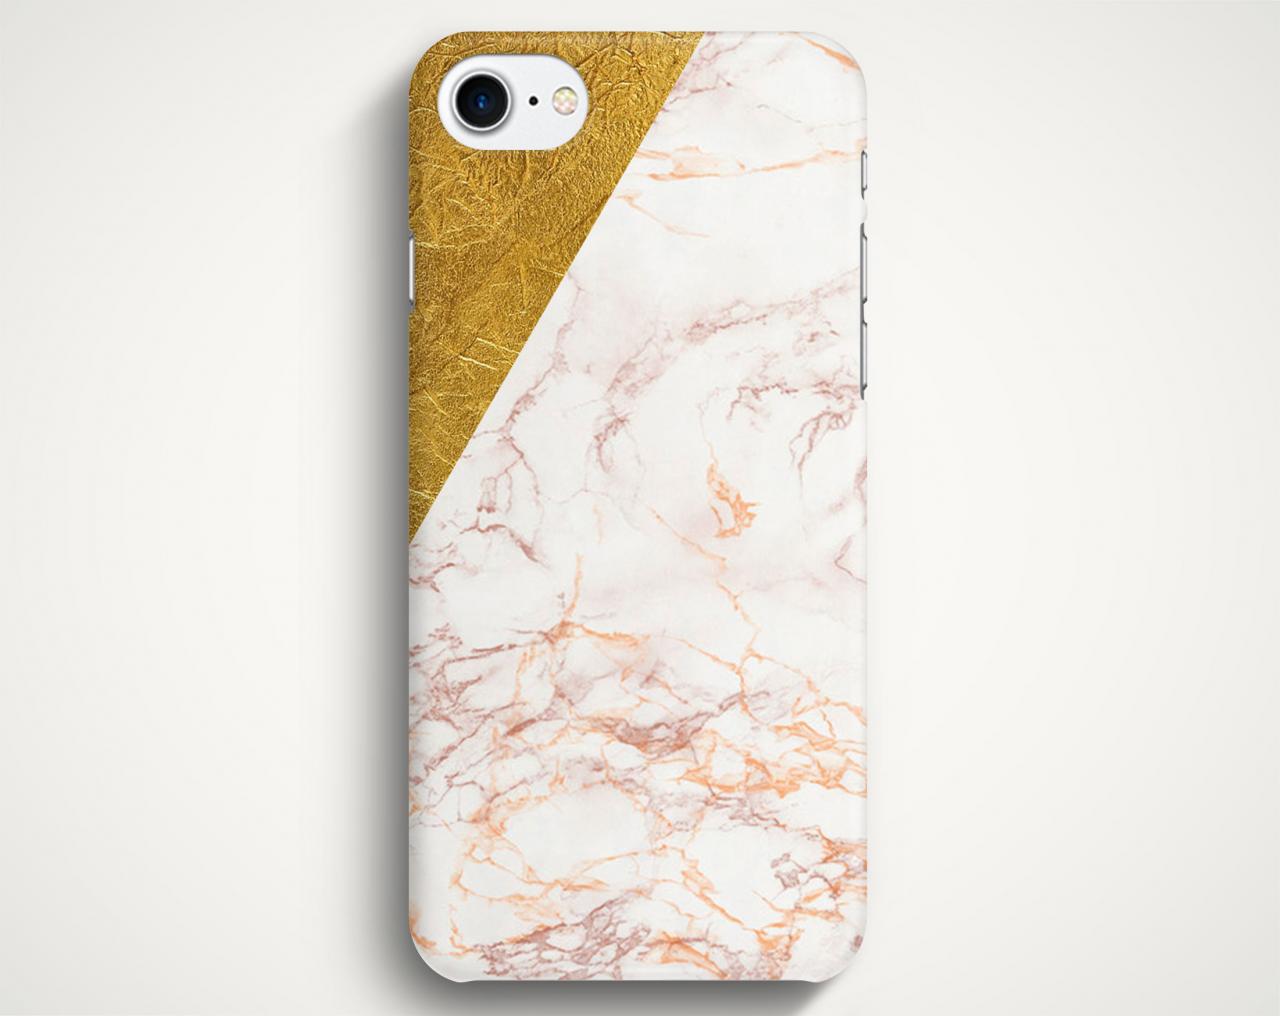 Gold Marble Texture Case For Iphone 7 Iphone 7 Plus Samsung Galaxy S8 Galaxy S7 Galaxy A3 Galaxy A5 Galaxy A7 Lg G6 Lg G5 Htc 10